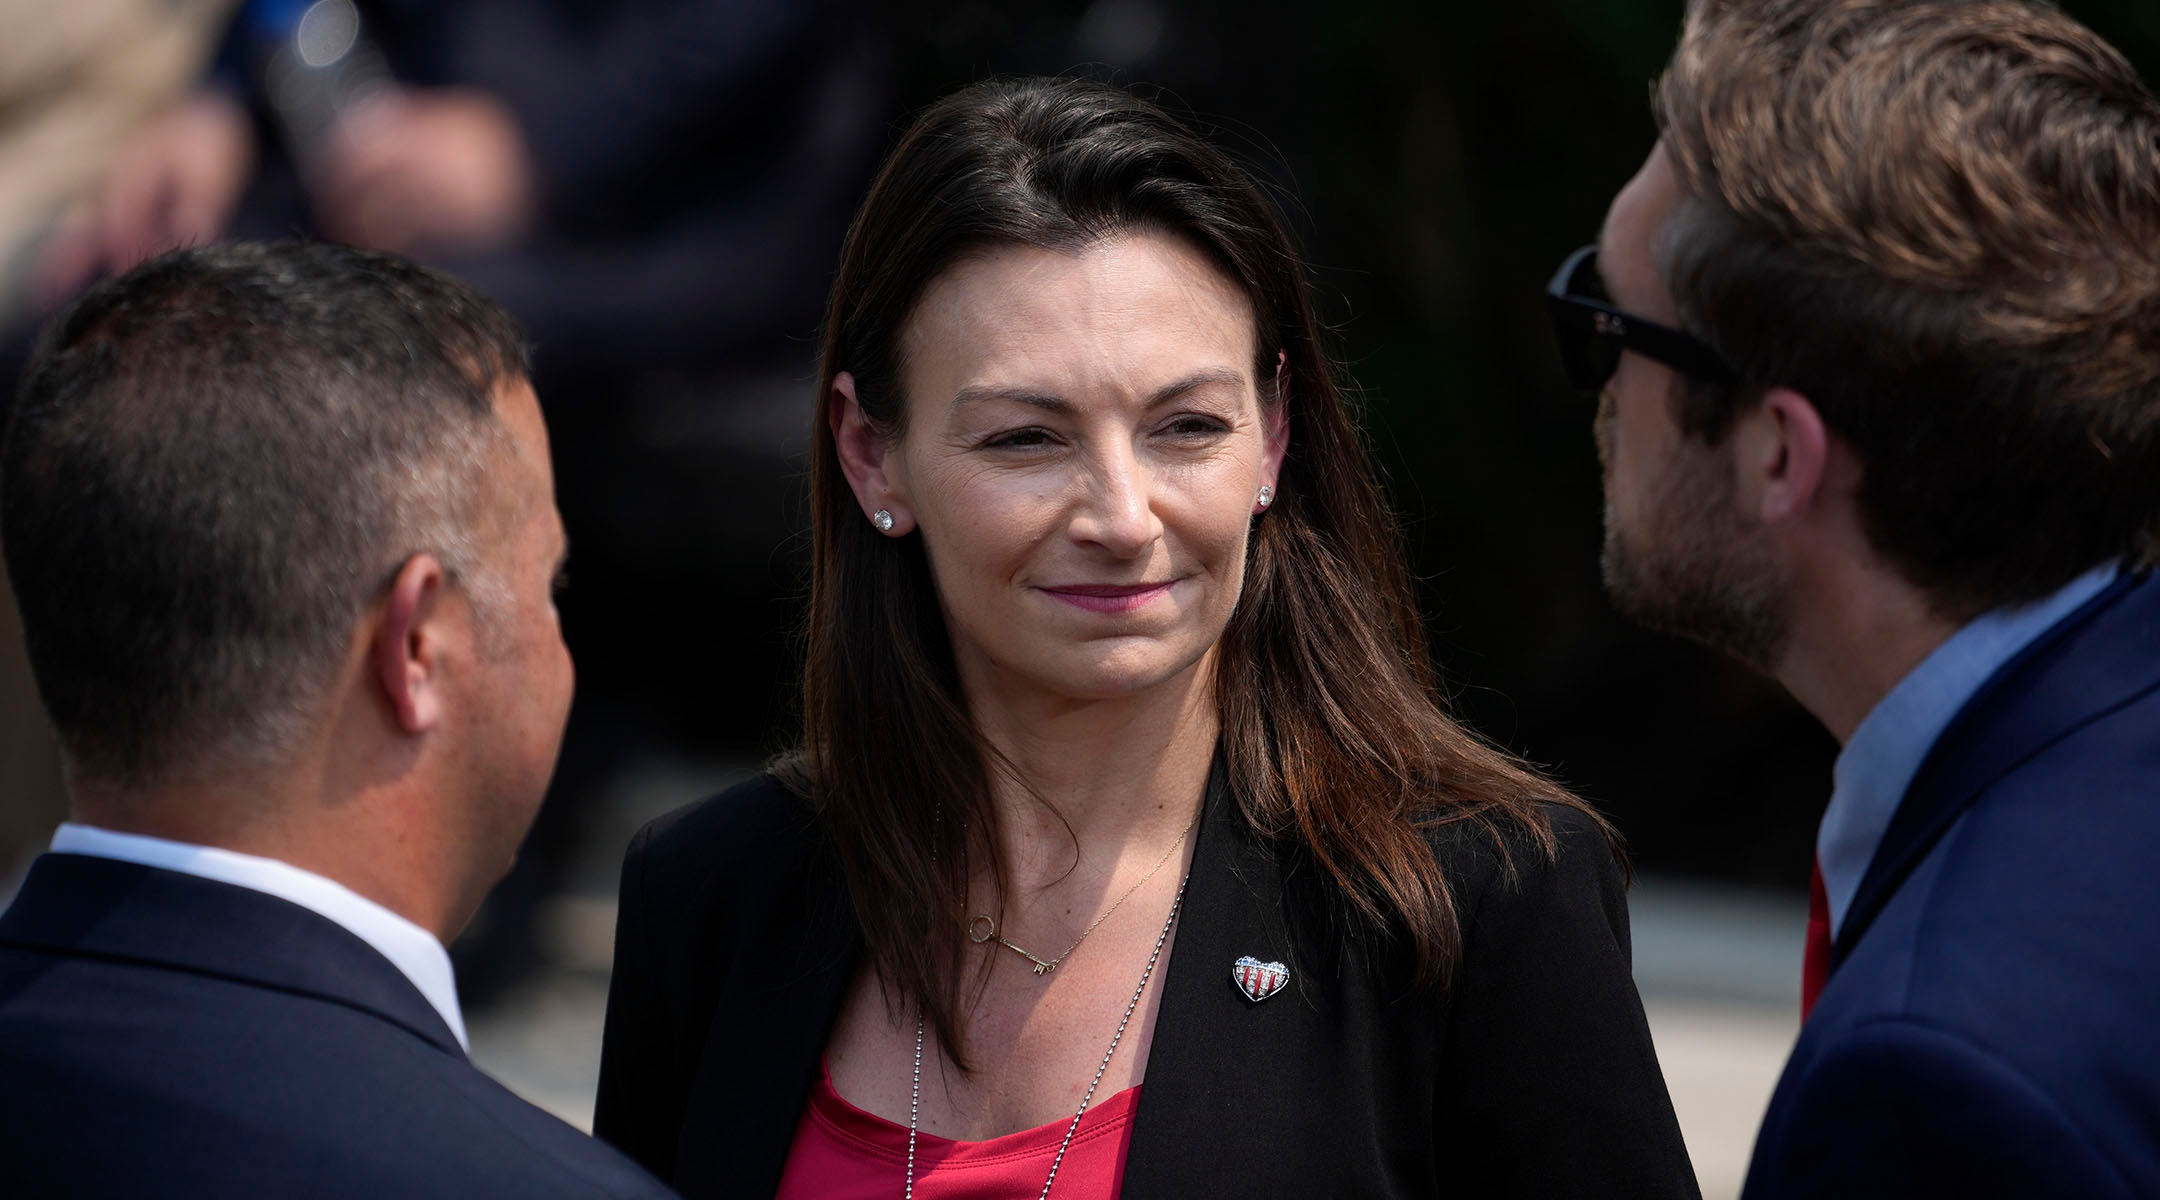 Florida Governor Candidate Nikki Fried Says Ron Desantis Reminds Her Of The Rise Of Hitler